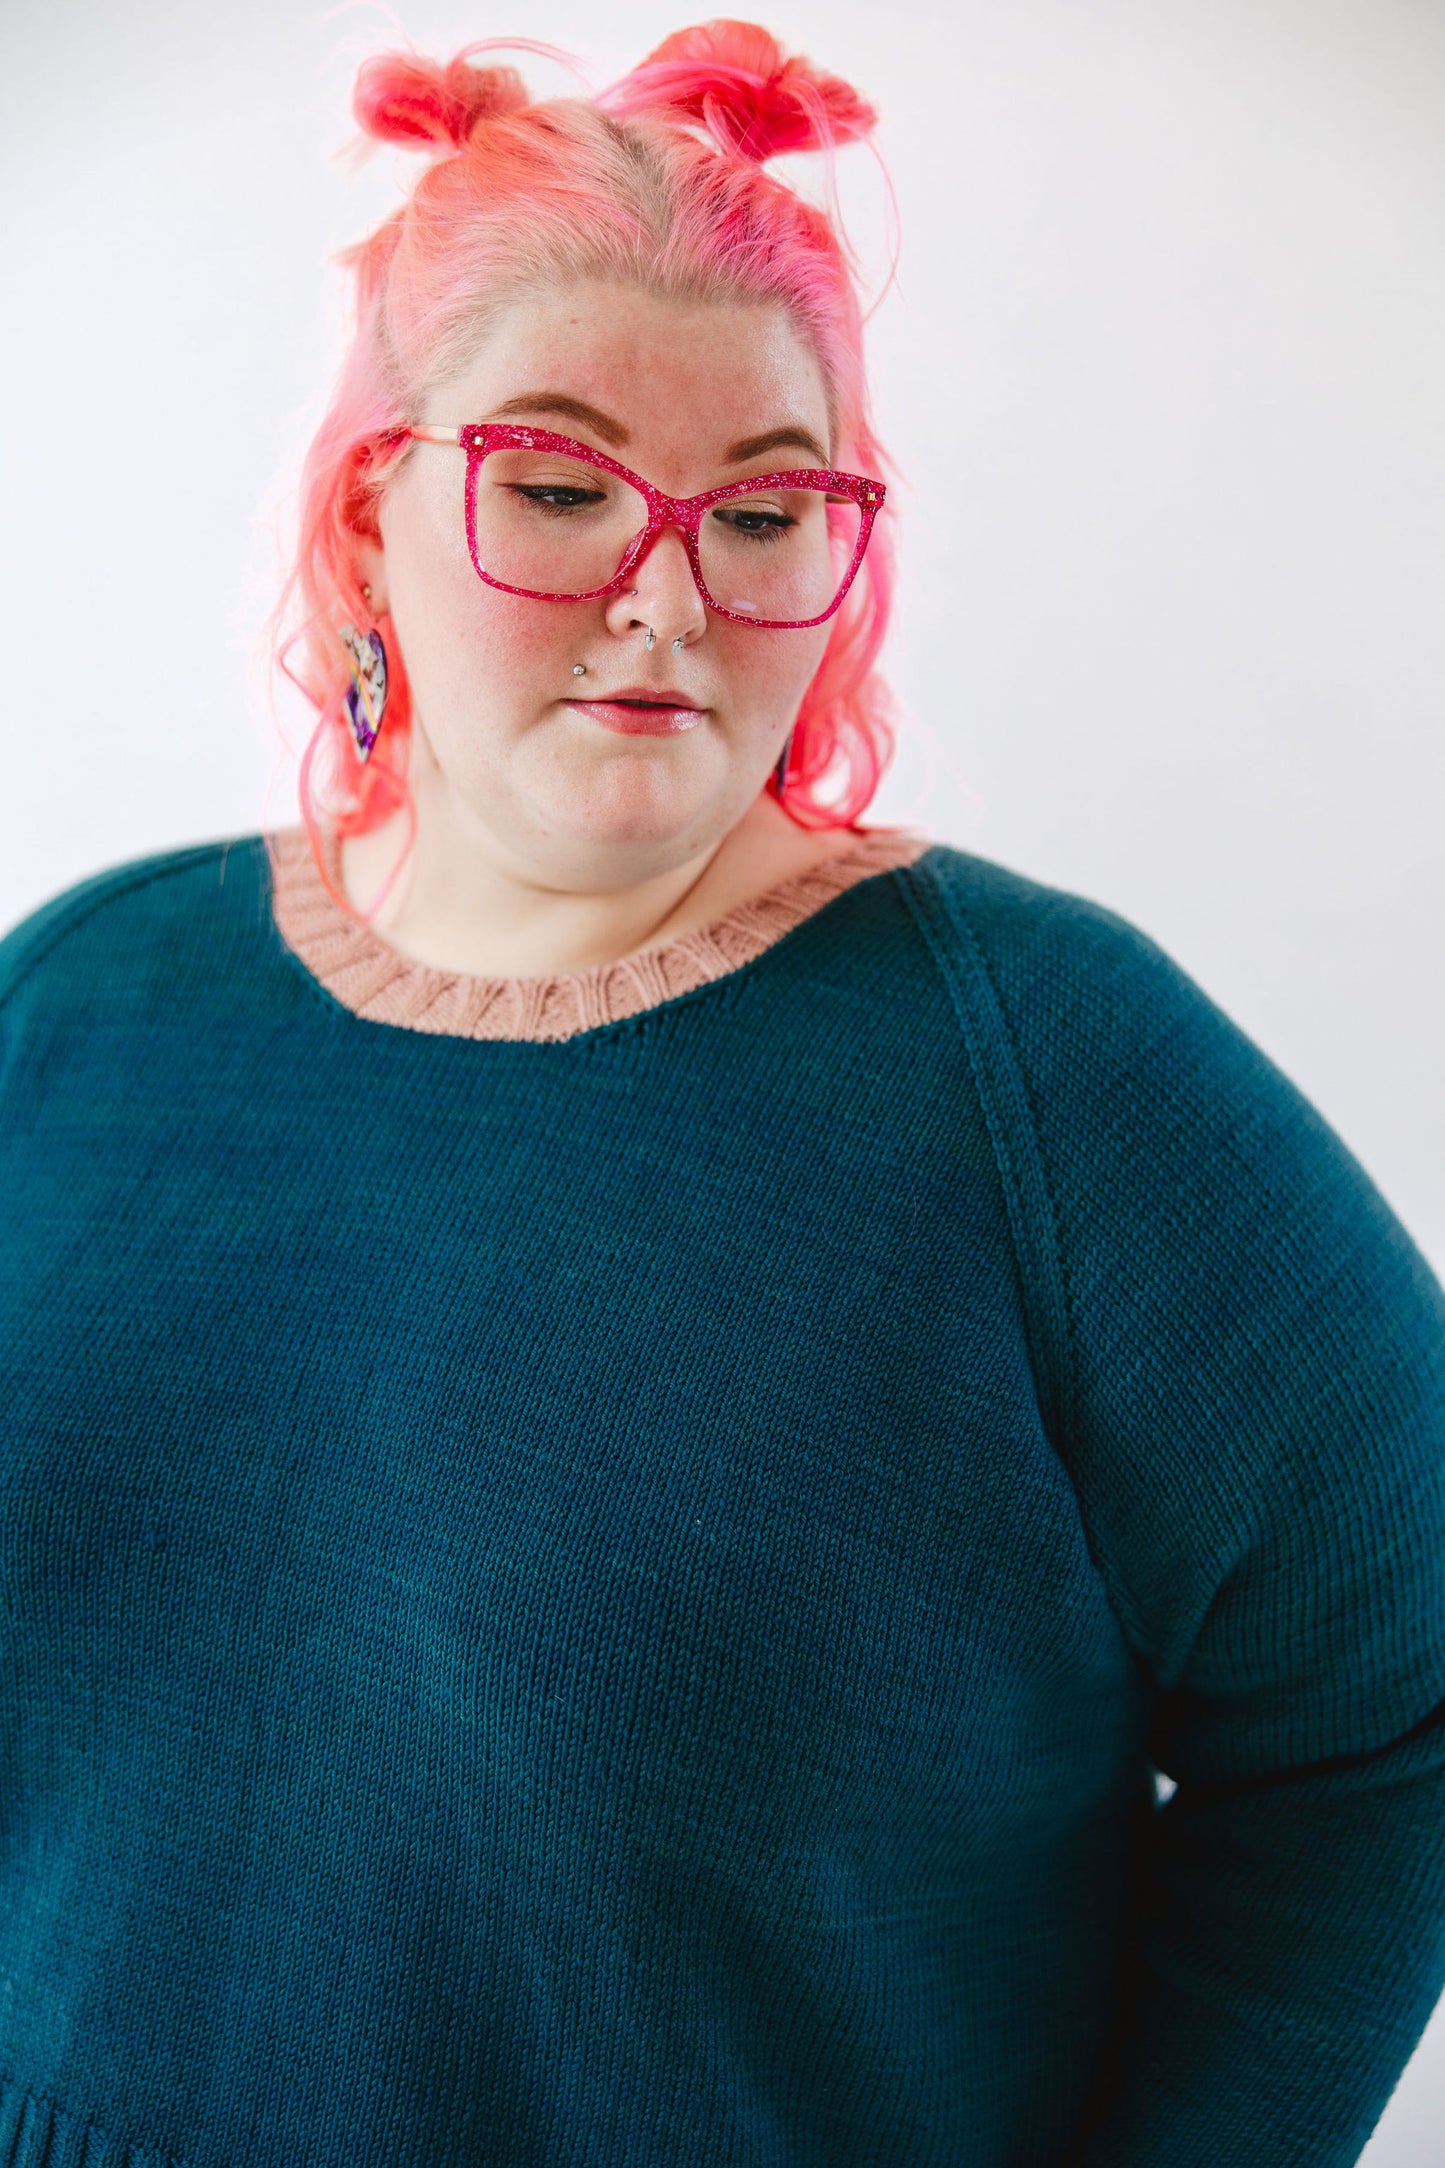 Seen close up, Courtney wears a teal hand knit sweater with an pink neckband. She looks off camera, her pink glasses matching her pink hair.